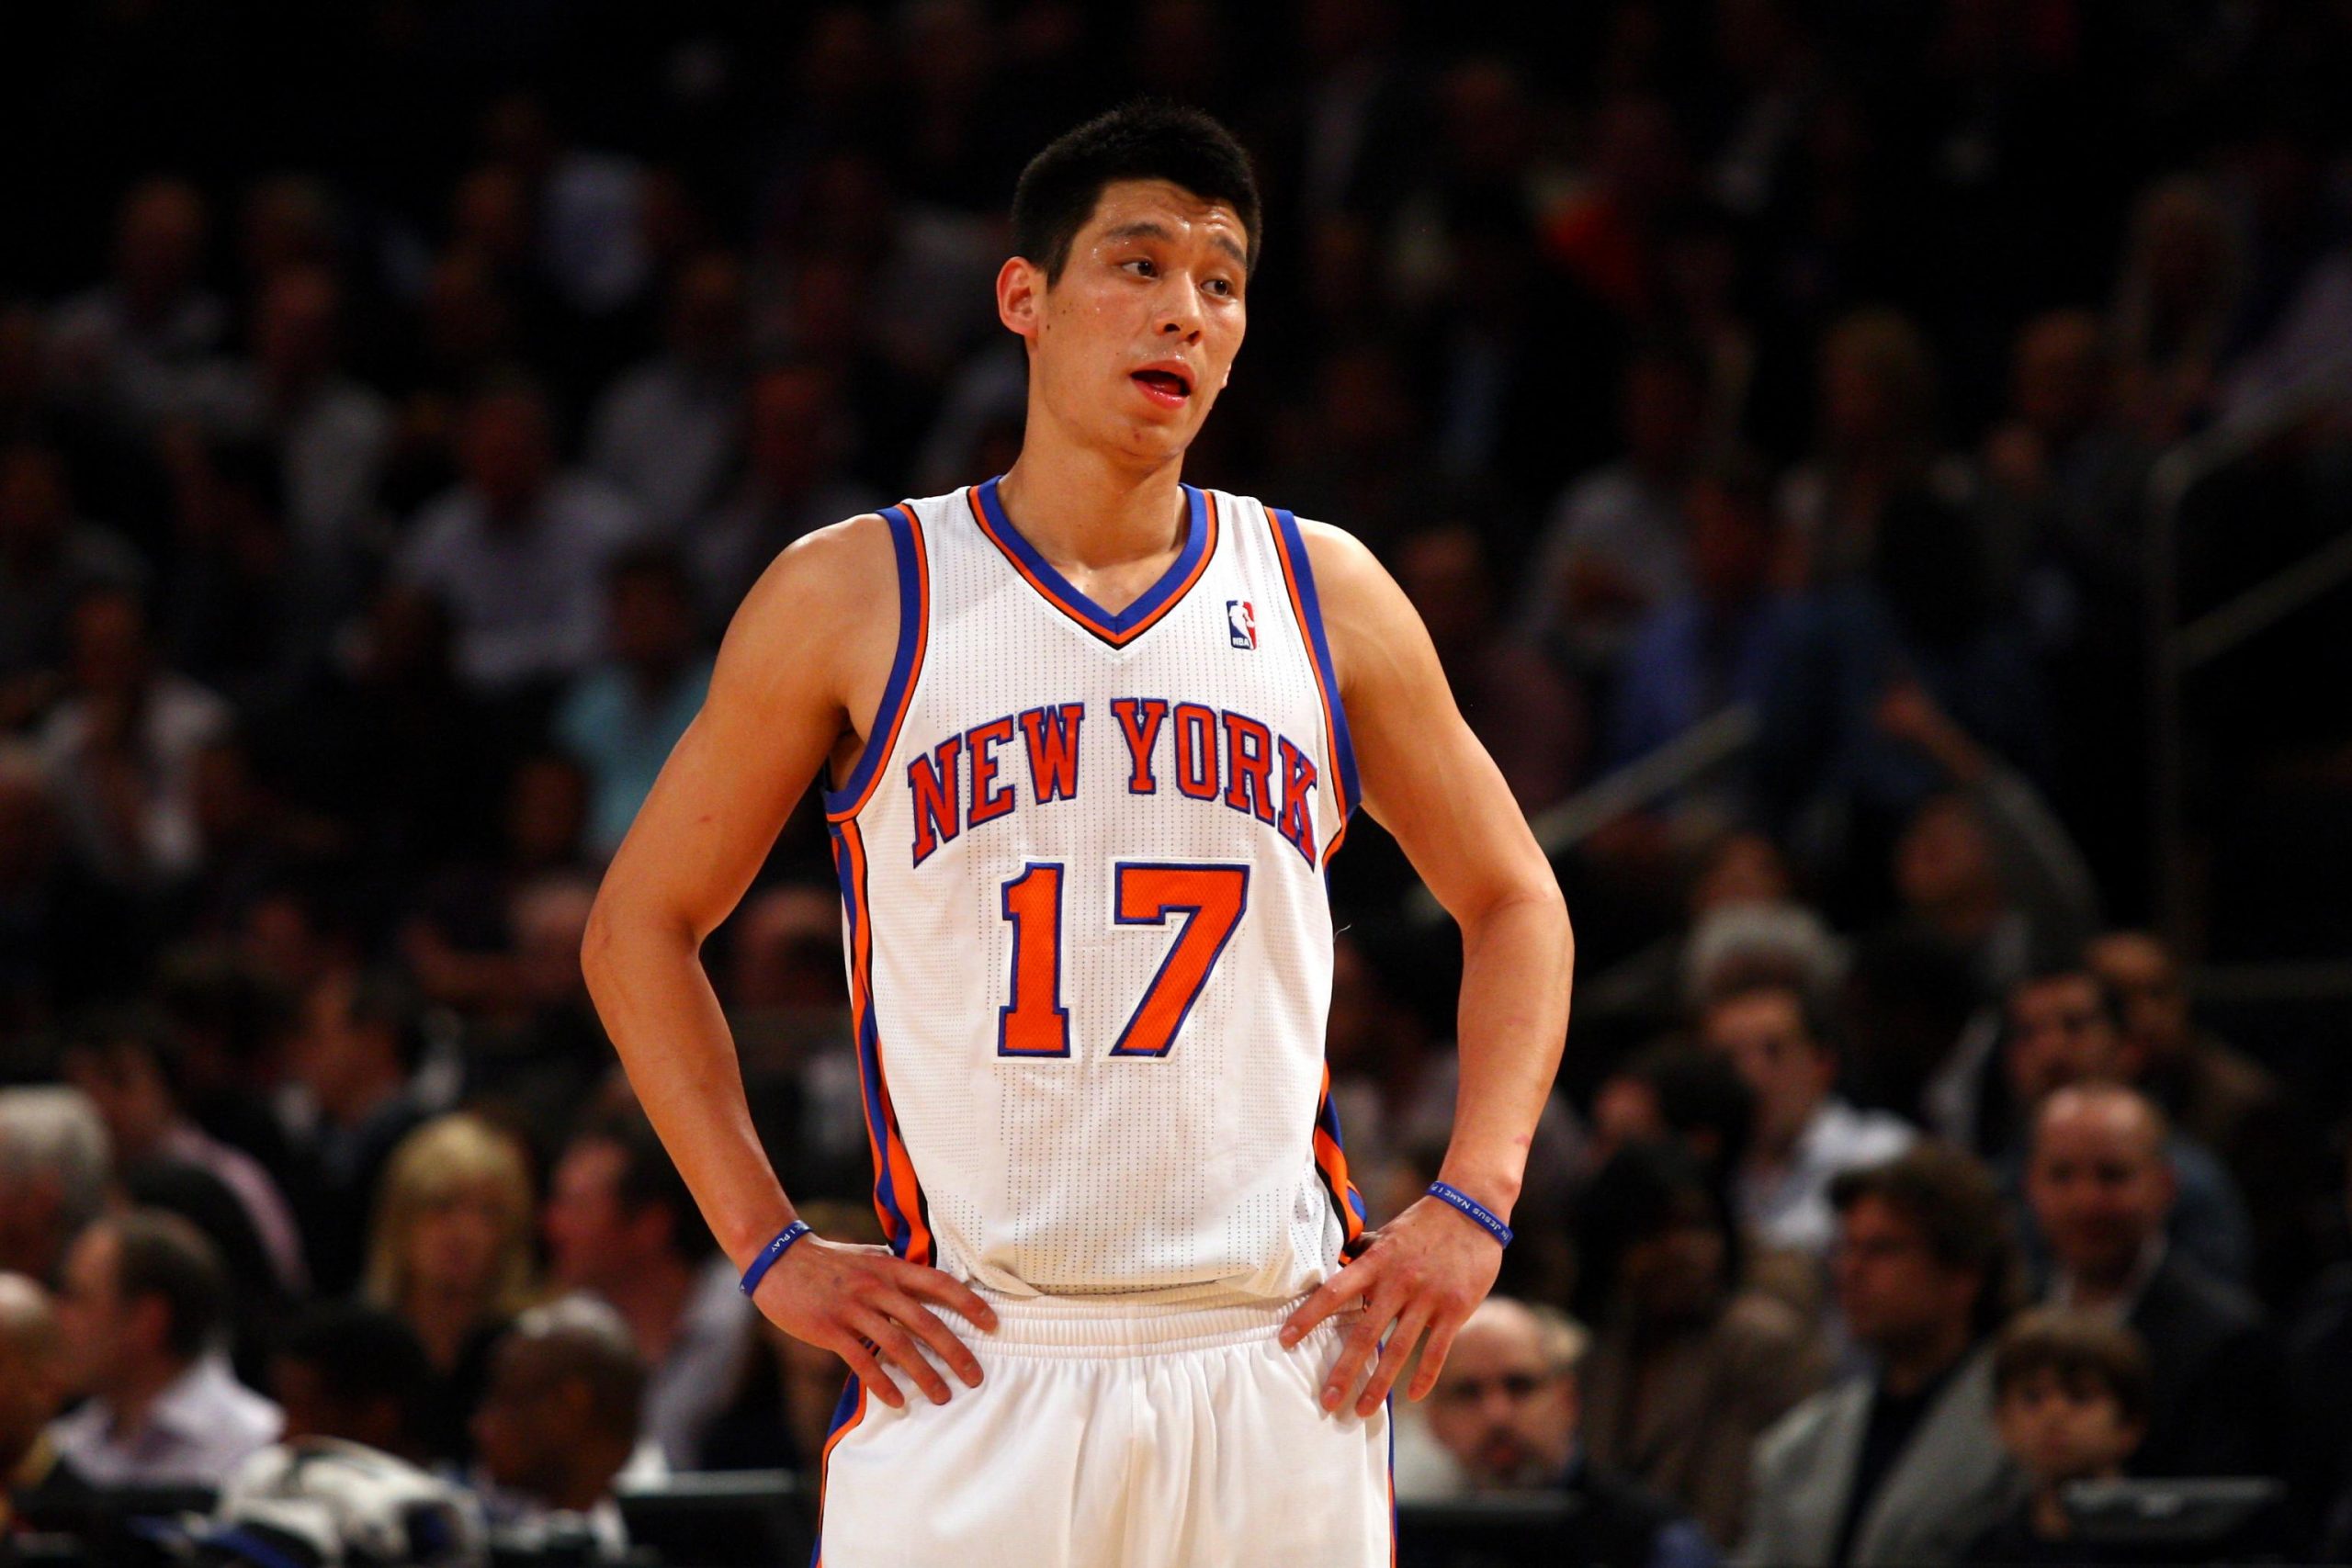 Jeremy Lin 2021 - Net Worth, Salary, Records, and Endorsements